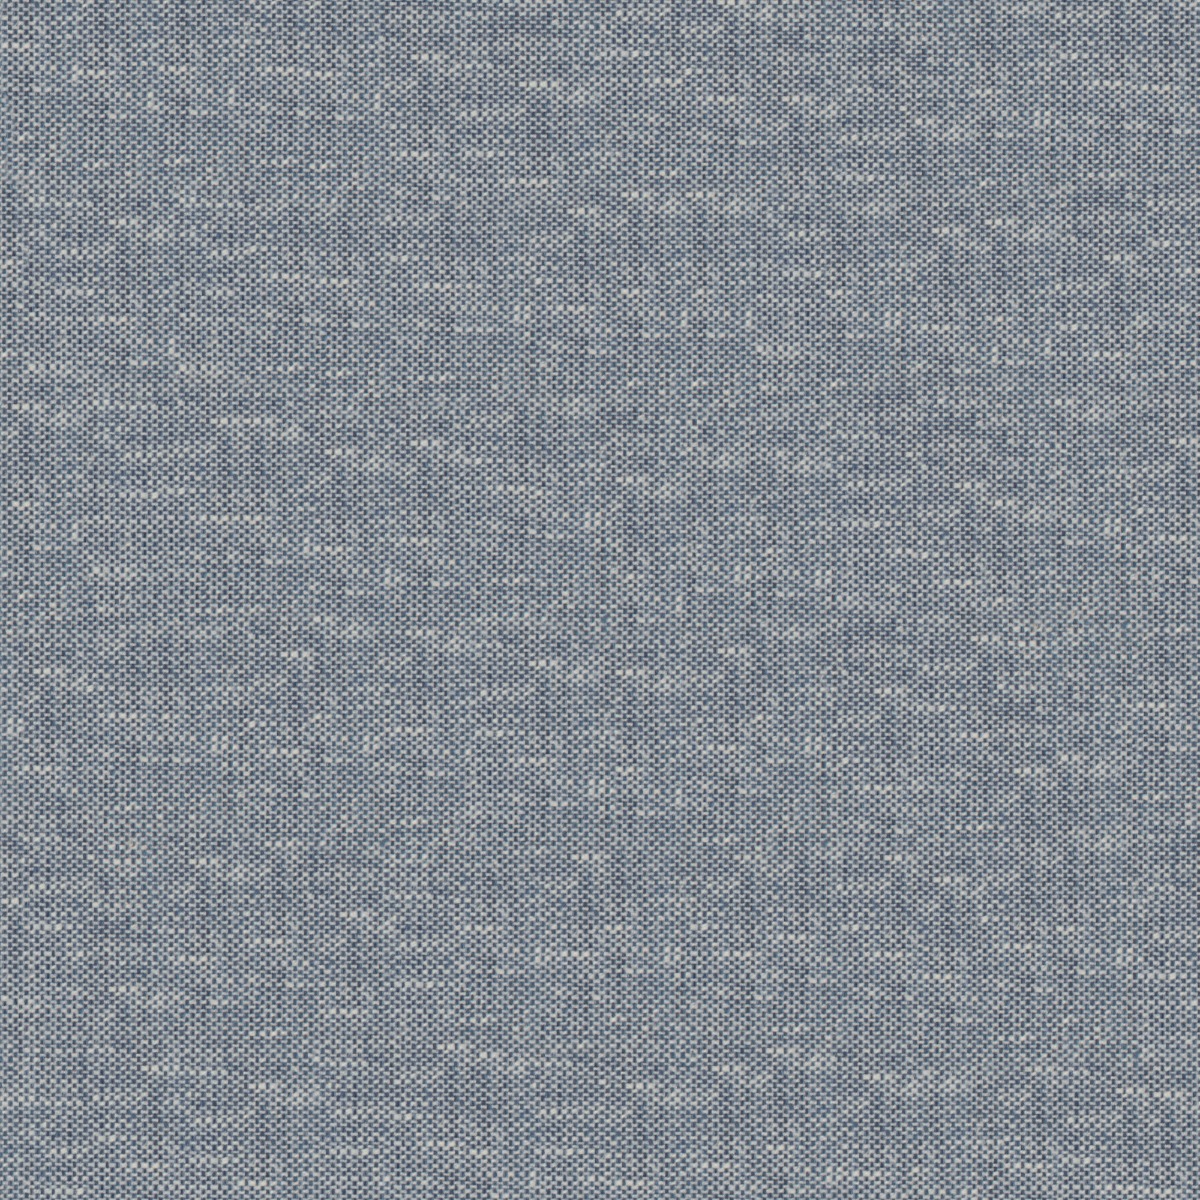 A seamless fabric texture with plain blue flat units arranged in a None pattern